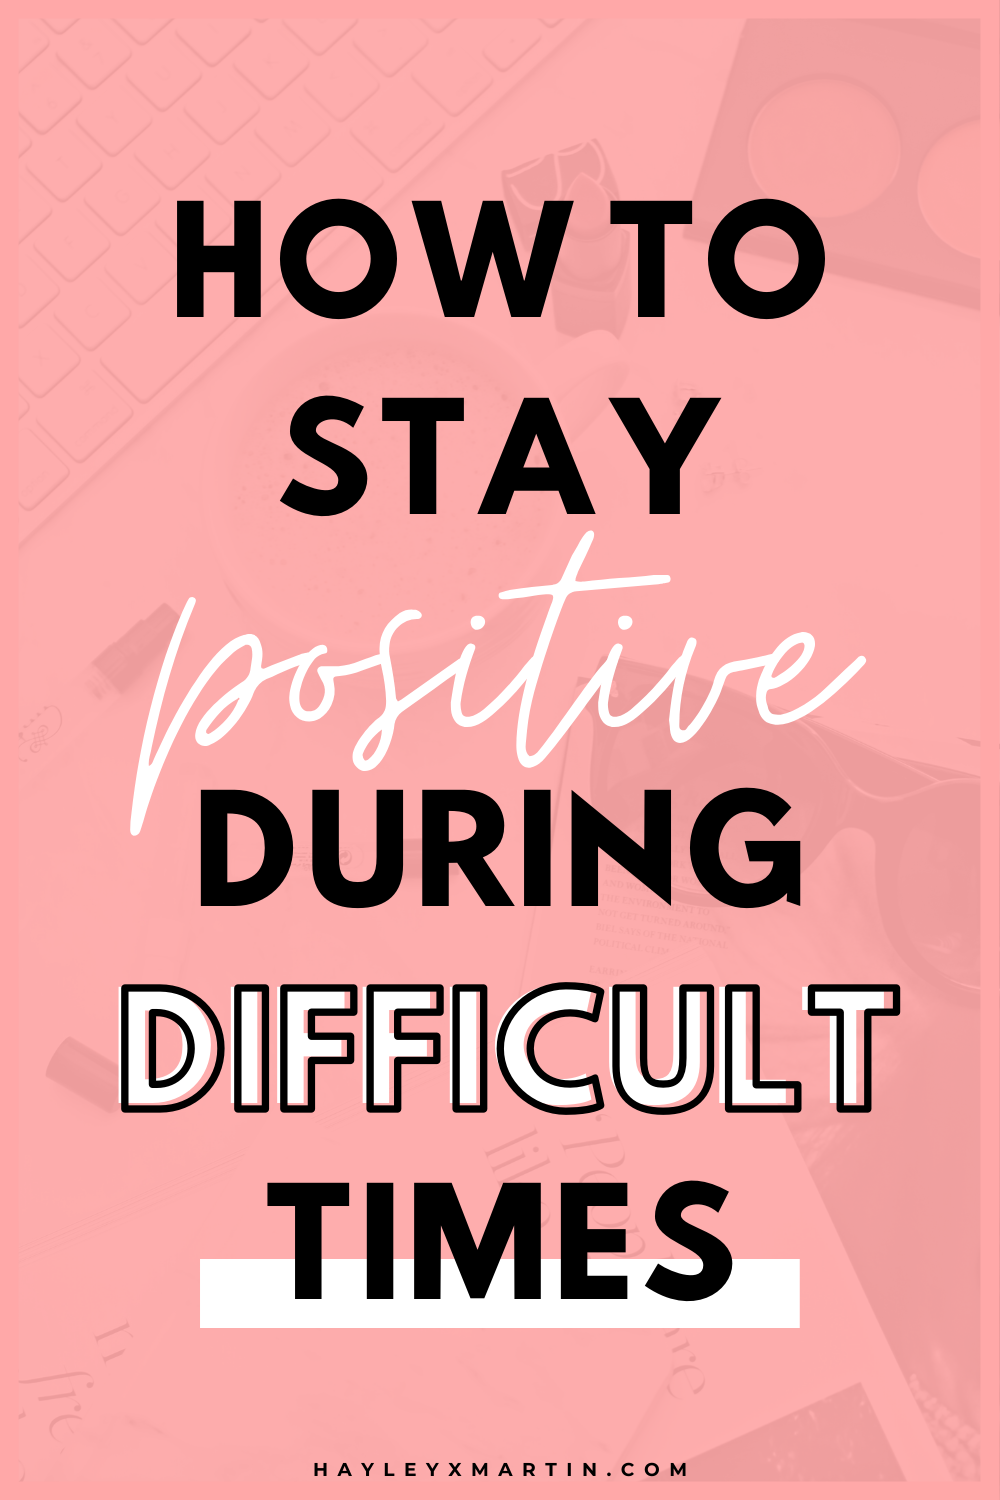 HOW TO STAY POSITIVE DURING DIFFICULT TIMES | HAYLEYXMARTIN